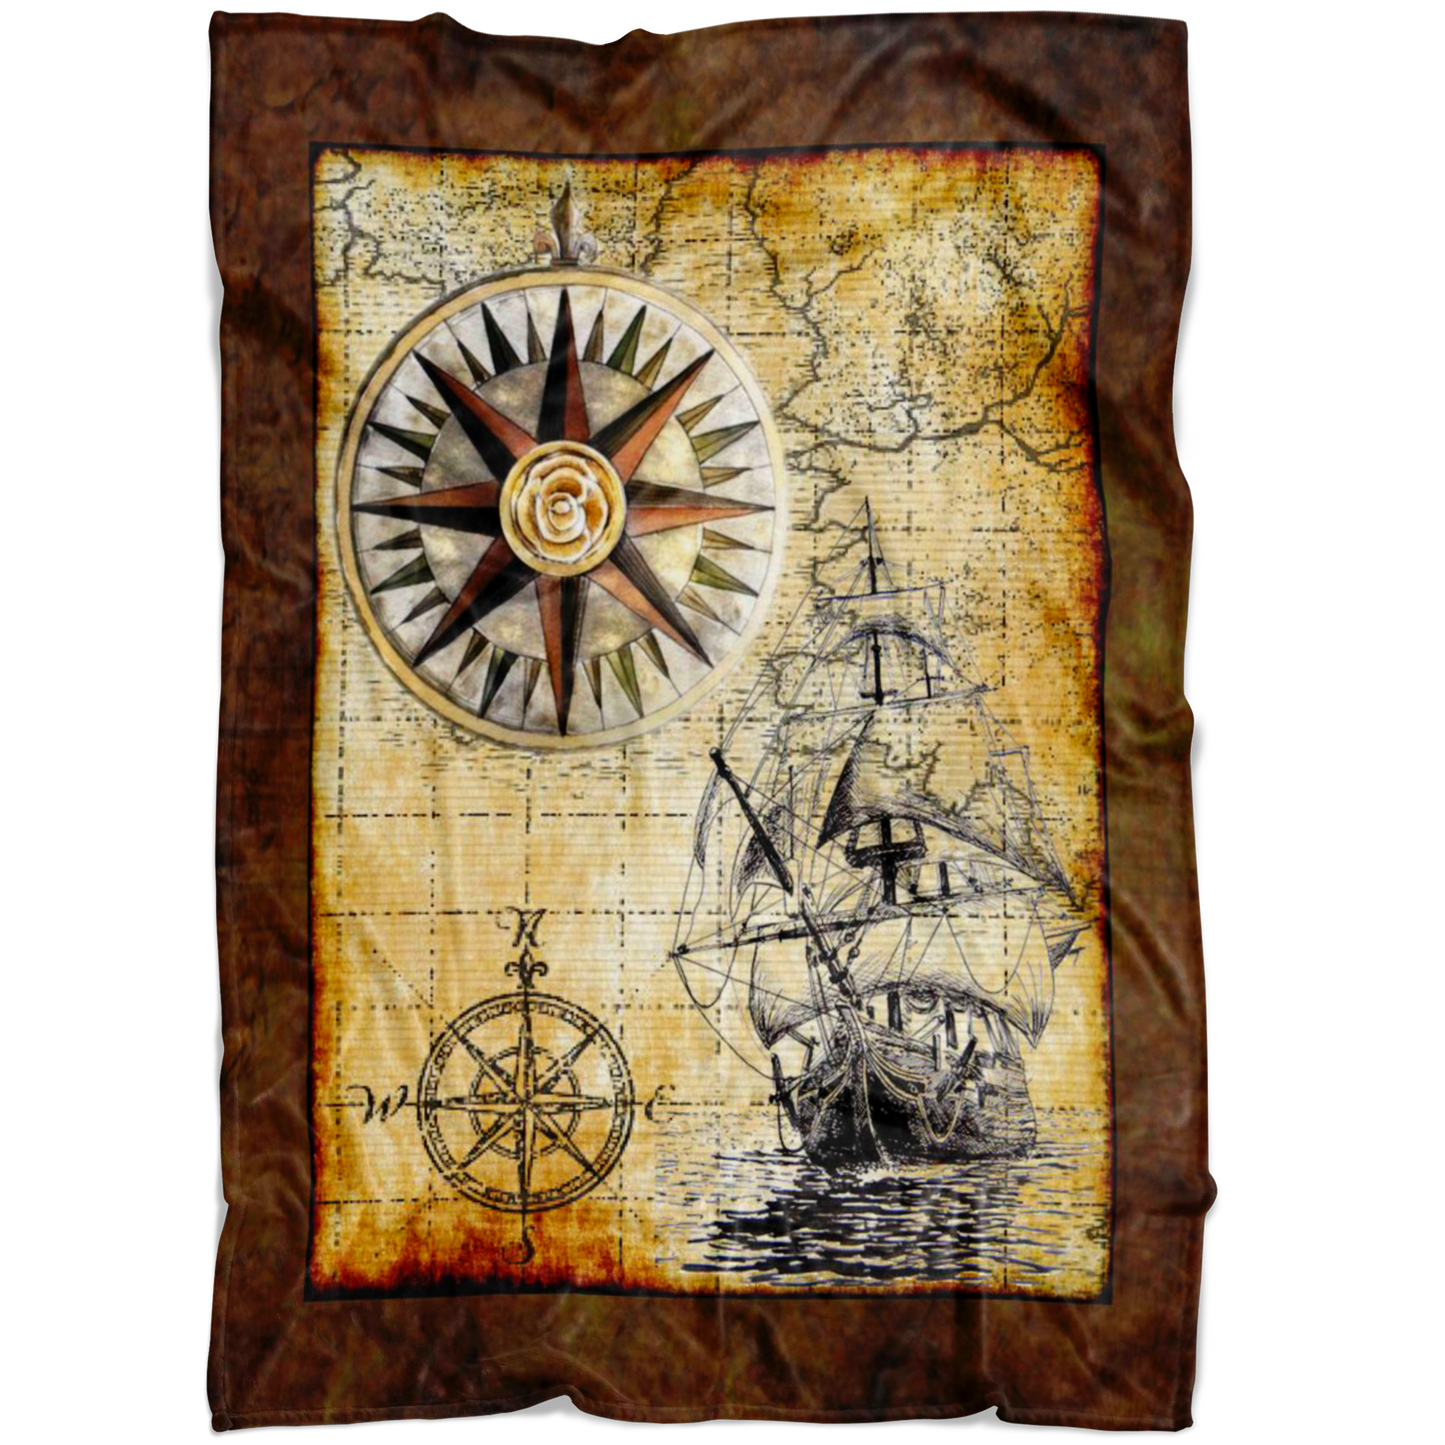 tall ship, pirate ship, pirate art, pirate tall ship, pirates carribean, compass rose, nautical, pirate captain, pirate wench, scallywag